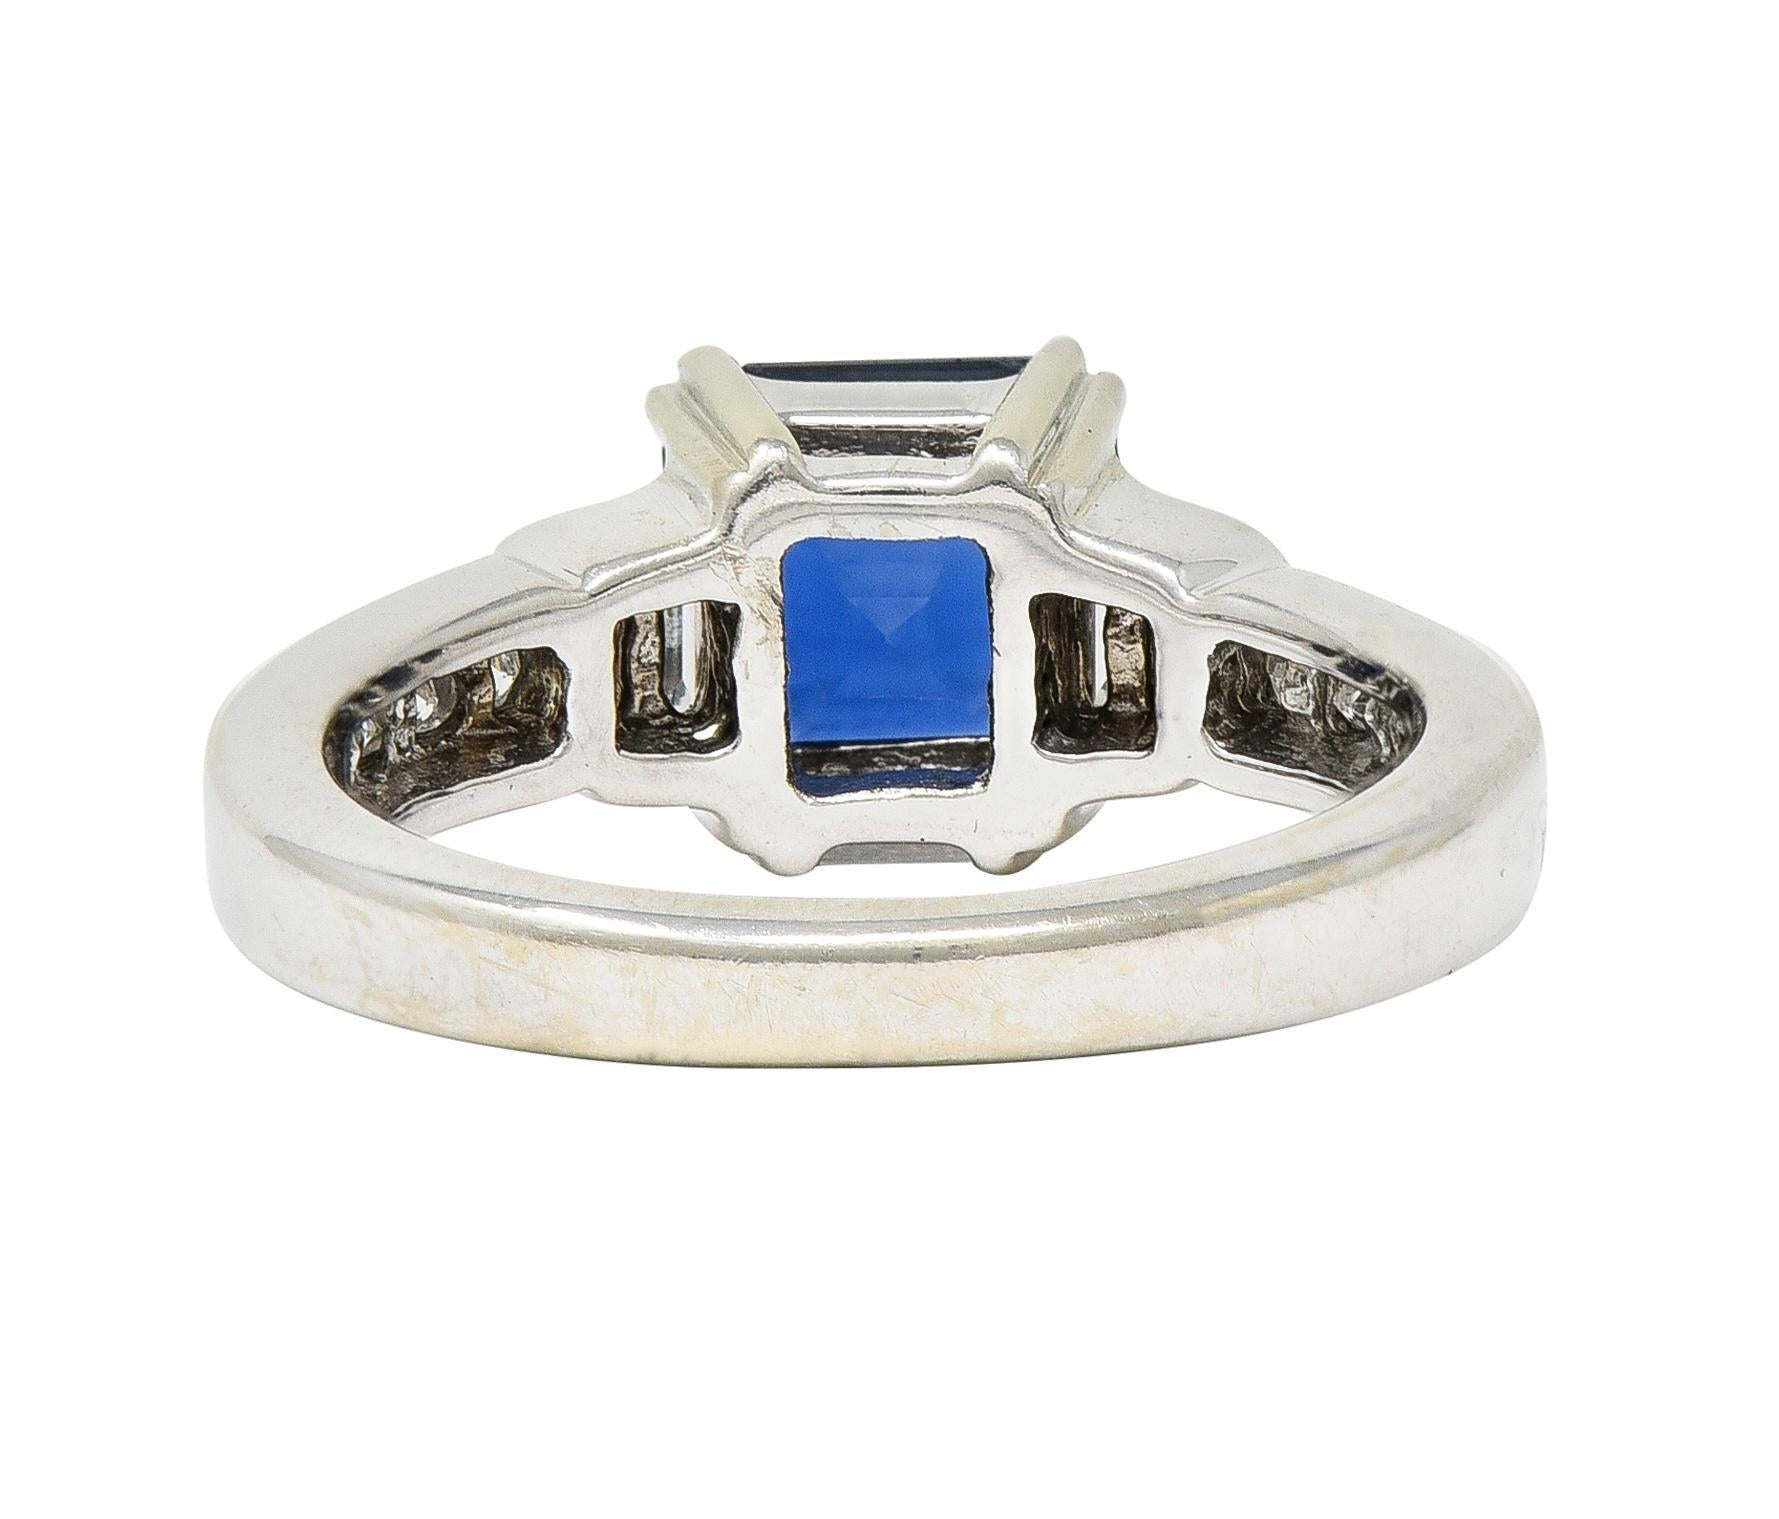 1990's 2.71 CTW Asscher Cut Sapphire Diamond 18 Karat White Gold Ring GIA In Excellent Condition For Sale In Philadelphia, PA